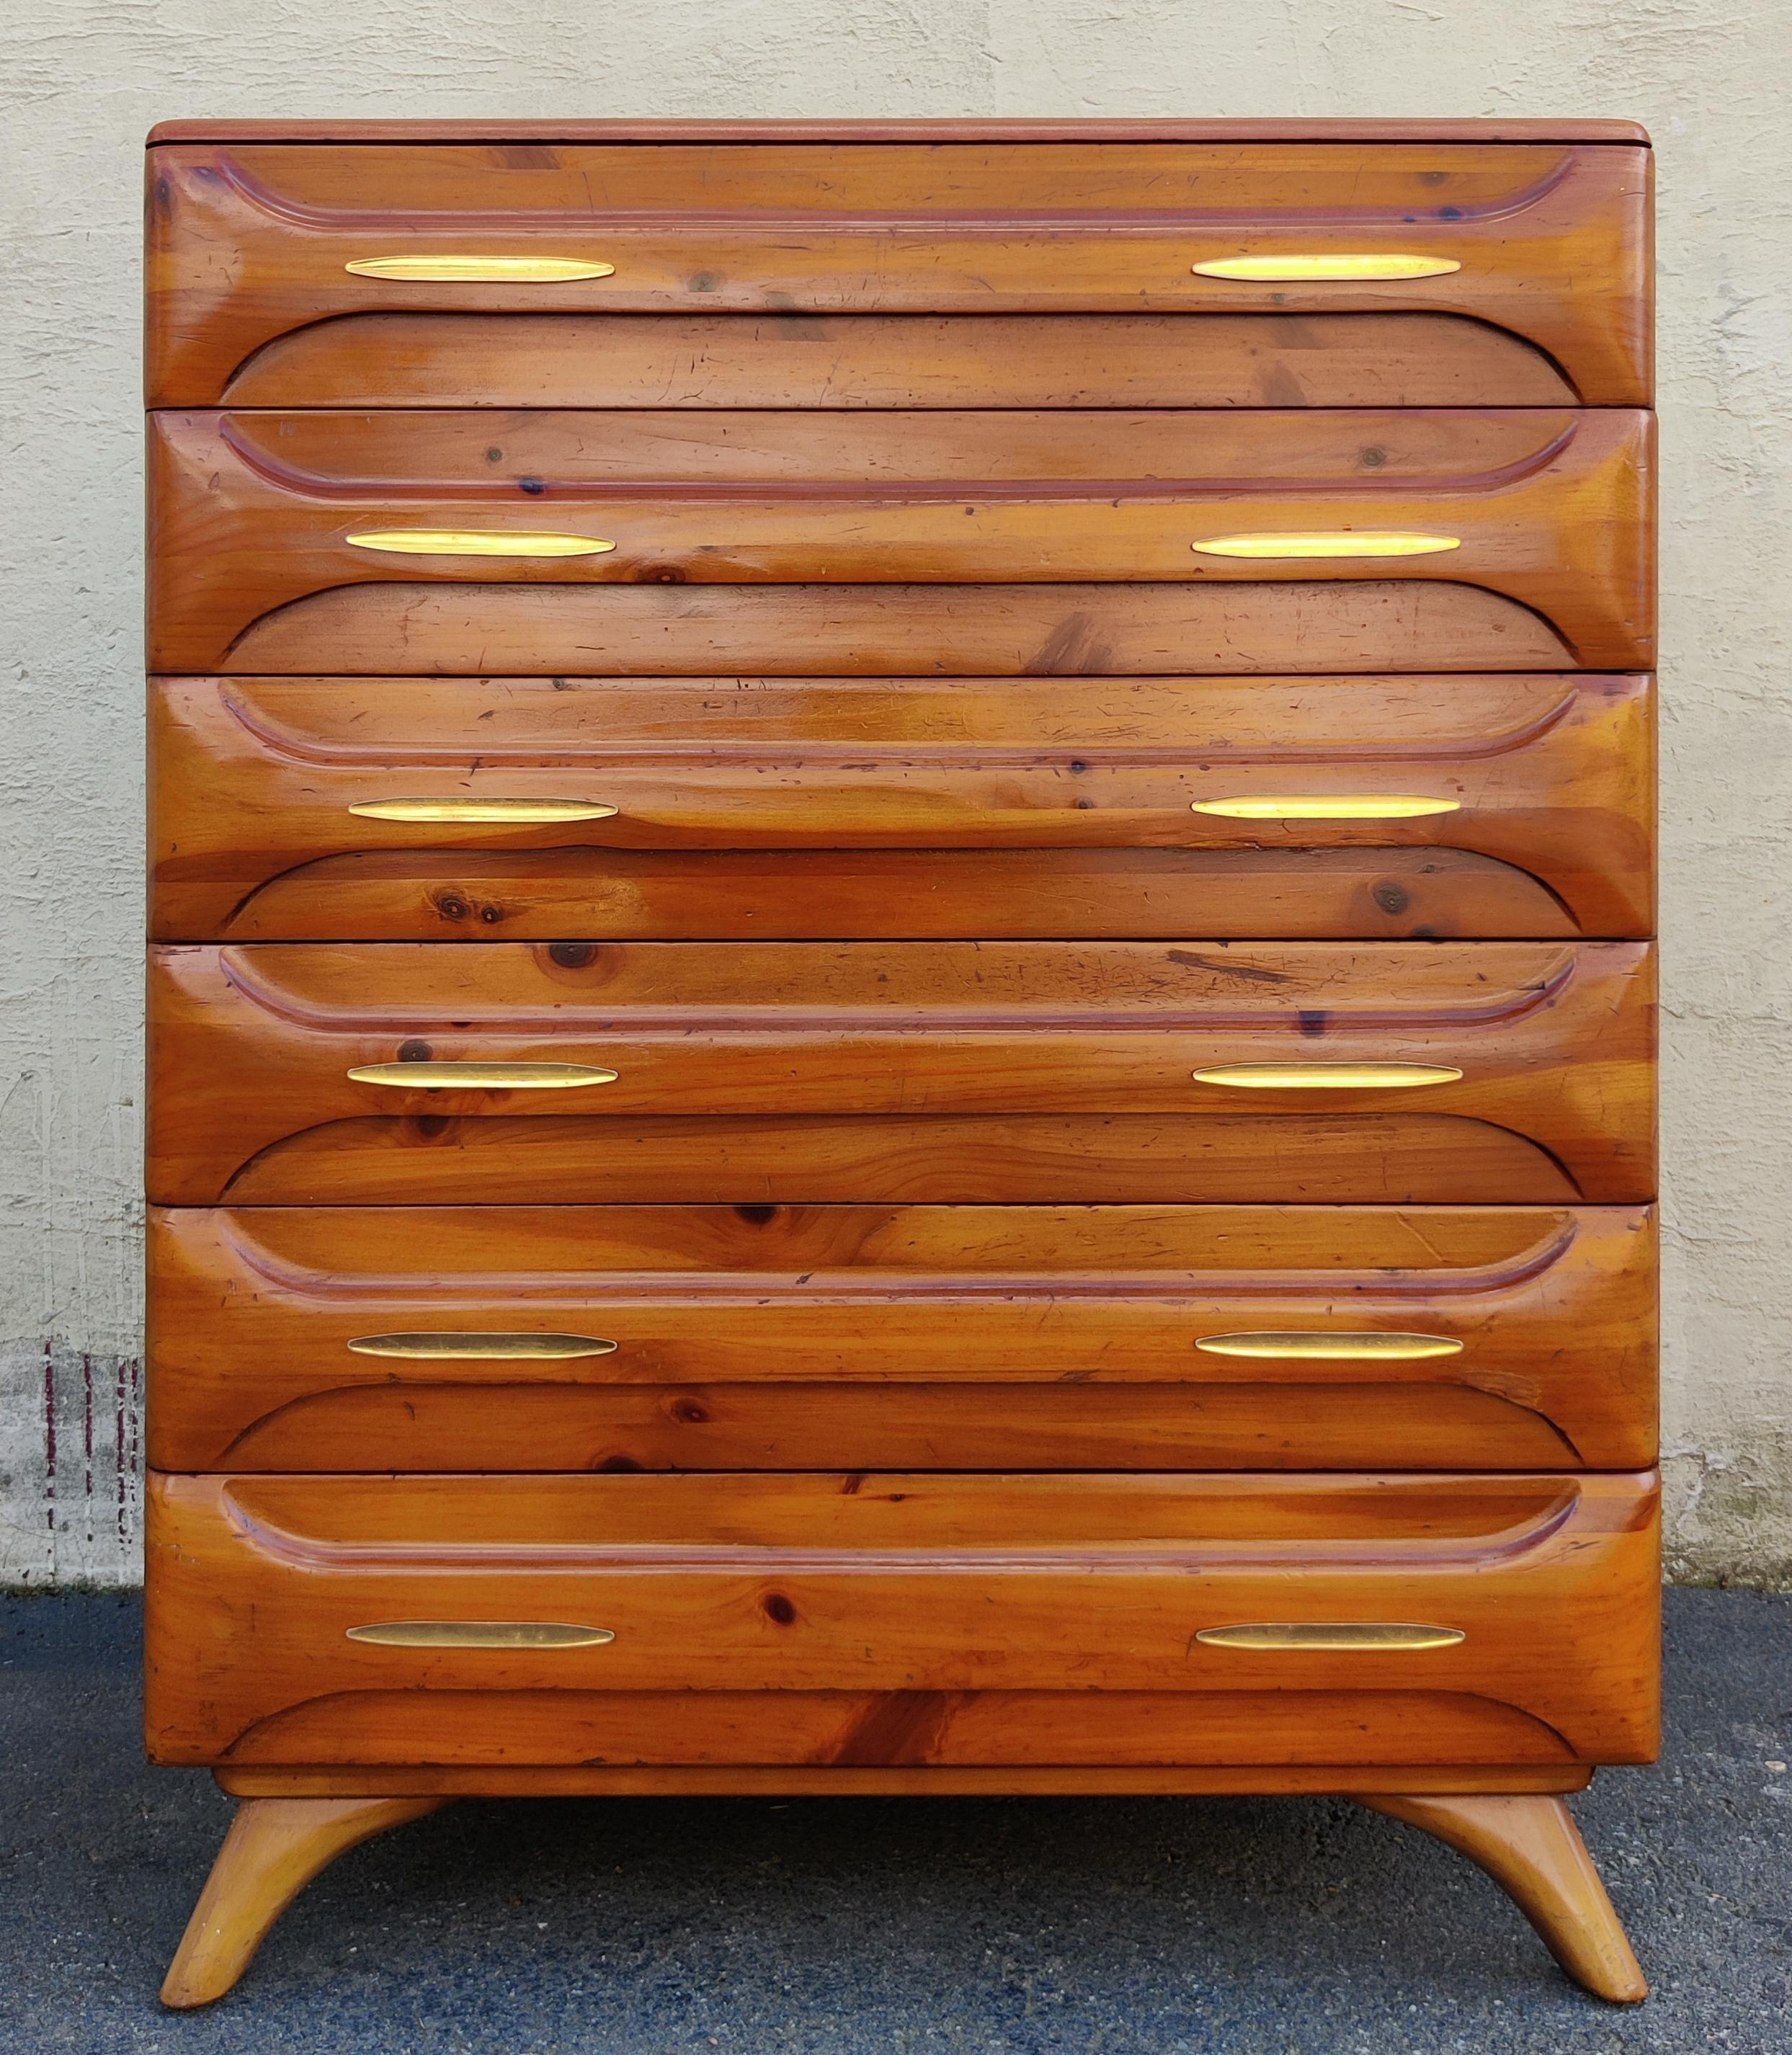 This tall dresser was produced in the 1970s by the Franklin Shockey Company for their Sculptured Pine line of furniture. Featuring solid pine construction, this dresser has a light and warm golden pine color with satin varnished finish. This color